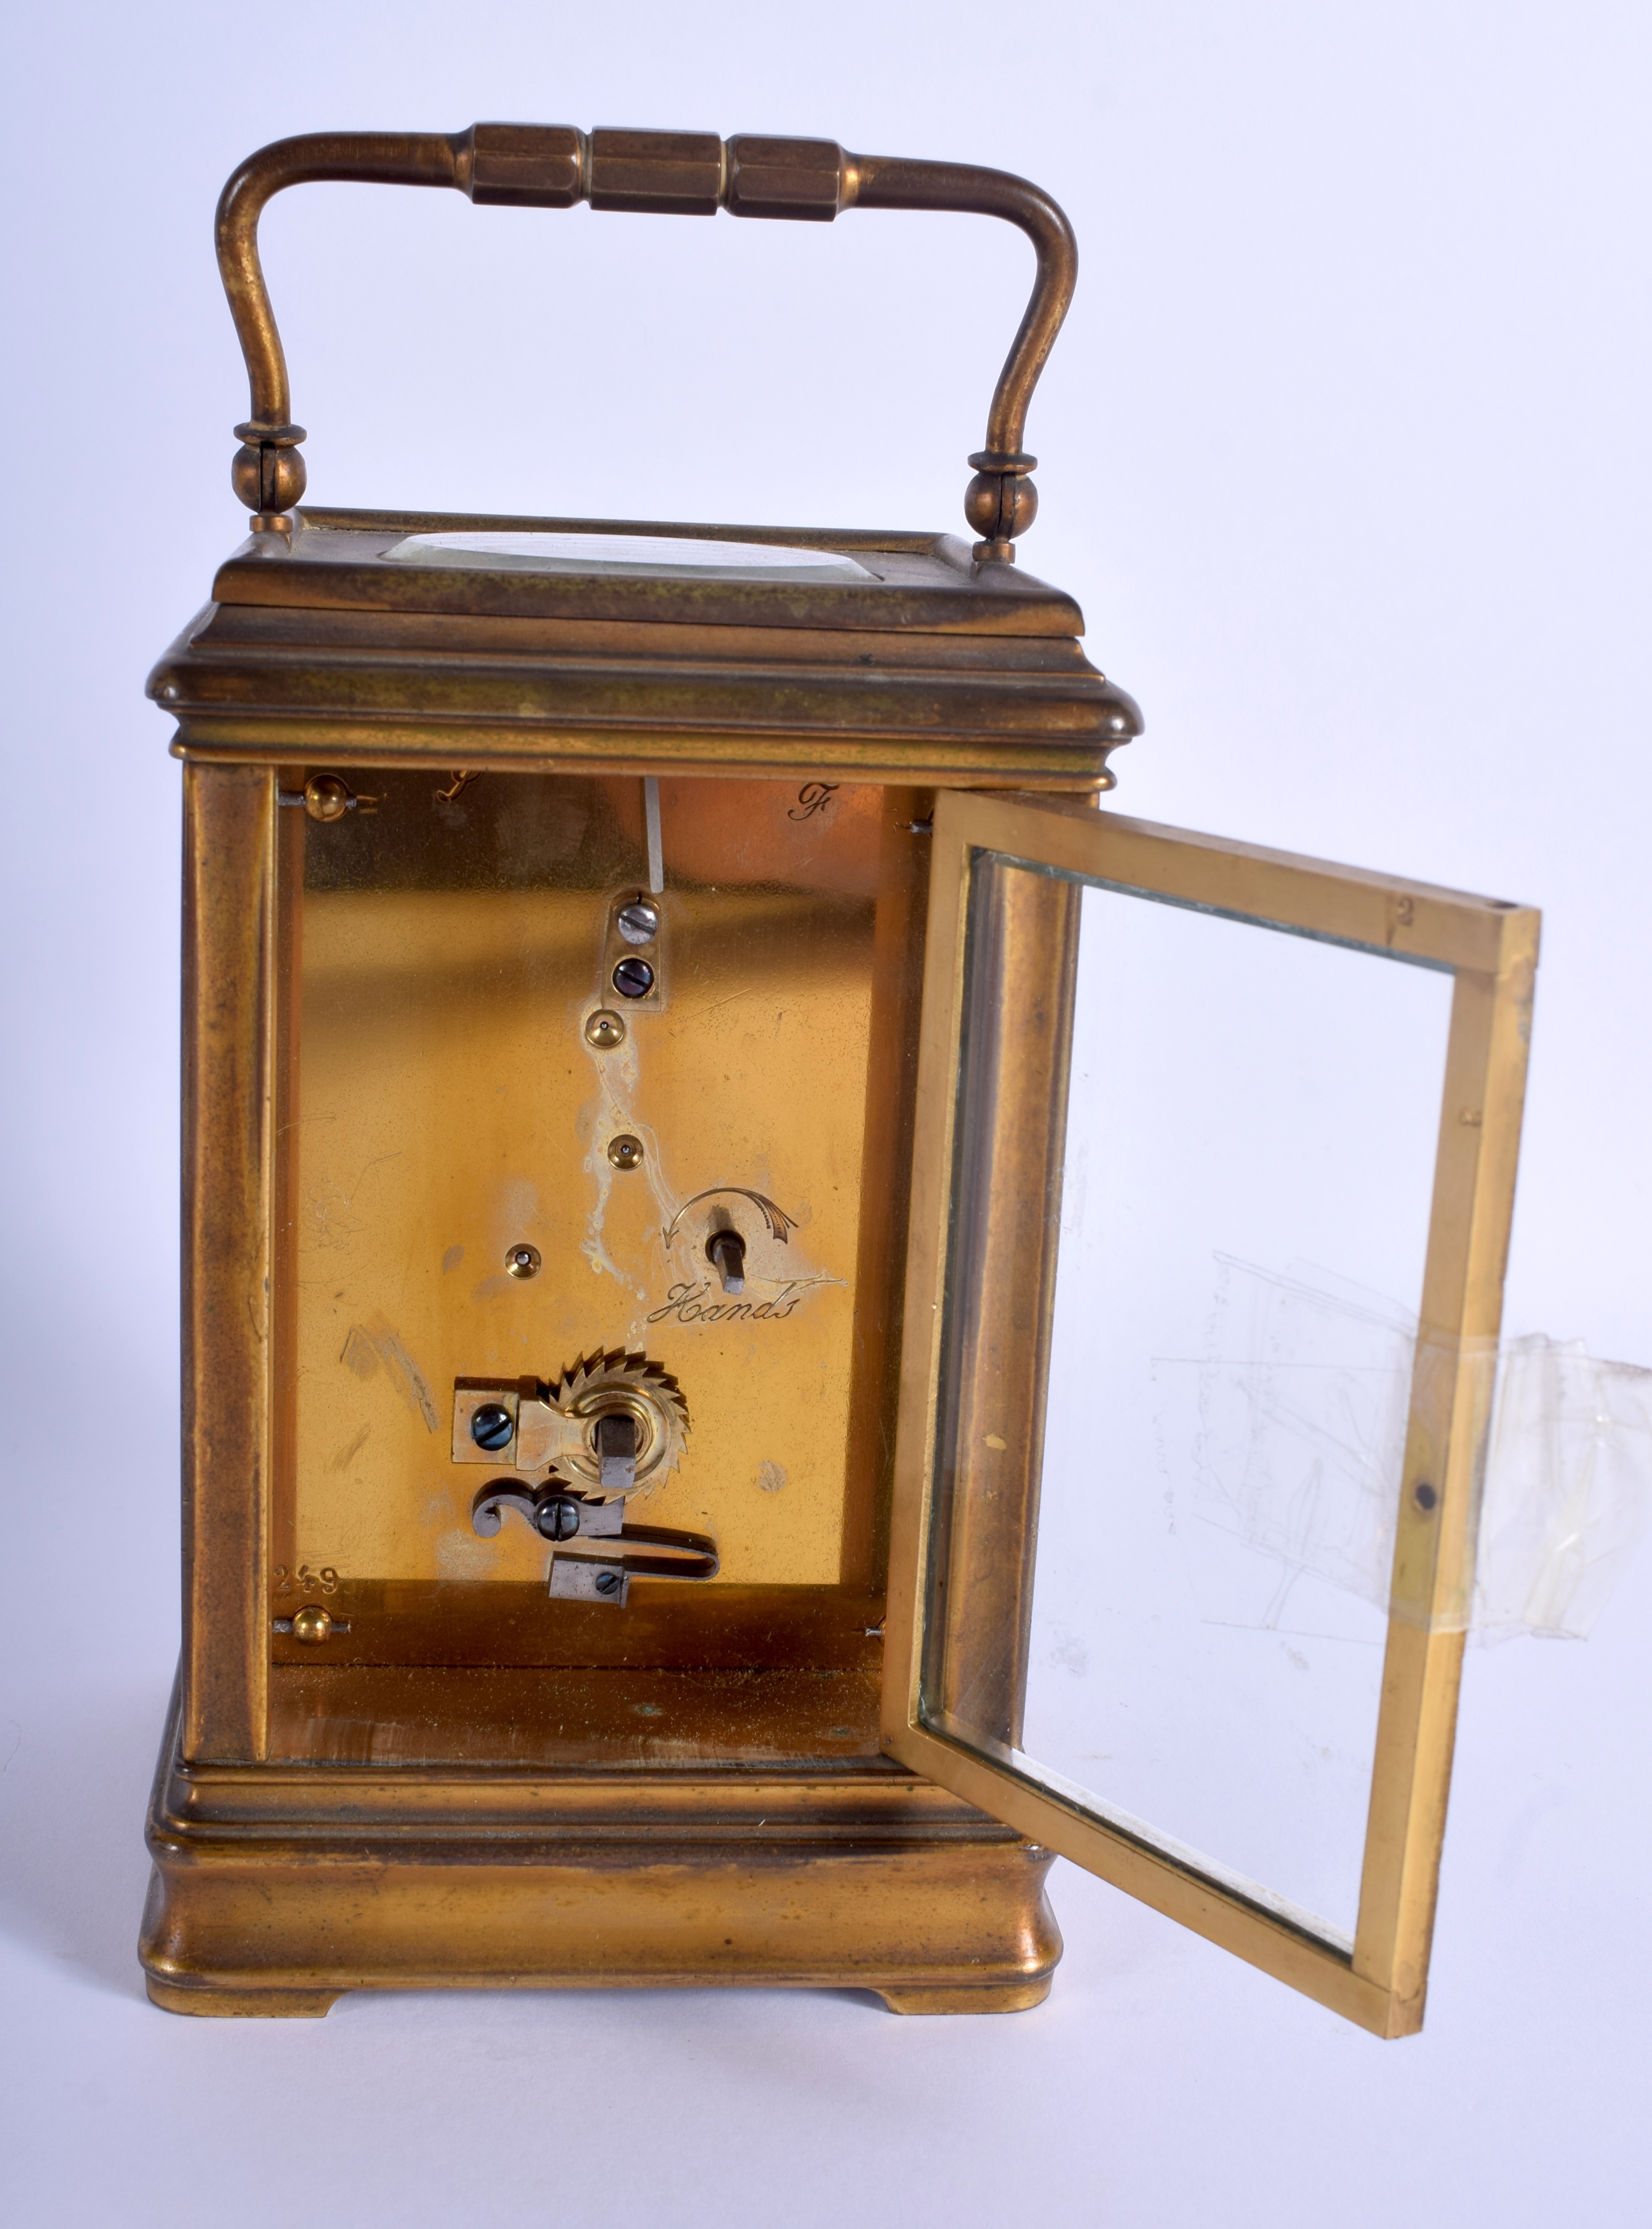 A LARGE ANTIQUE BRASS CARRIAGE CLOCK. 18.5 cm high inc handle. - Image 2 of 4